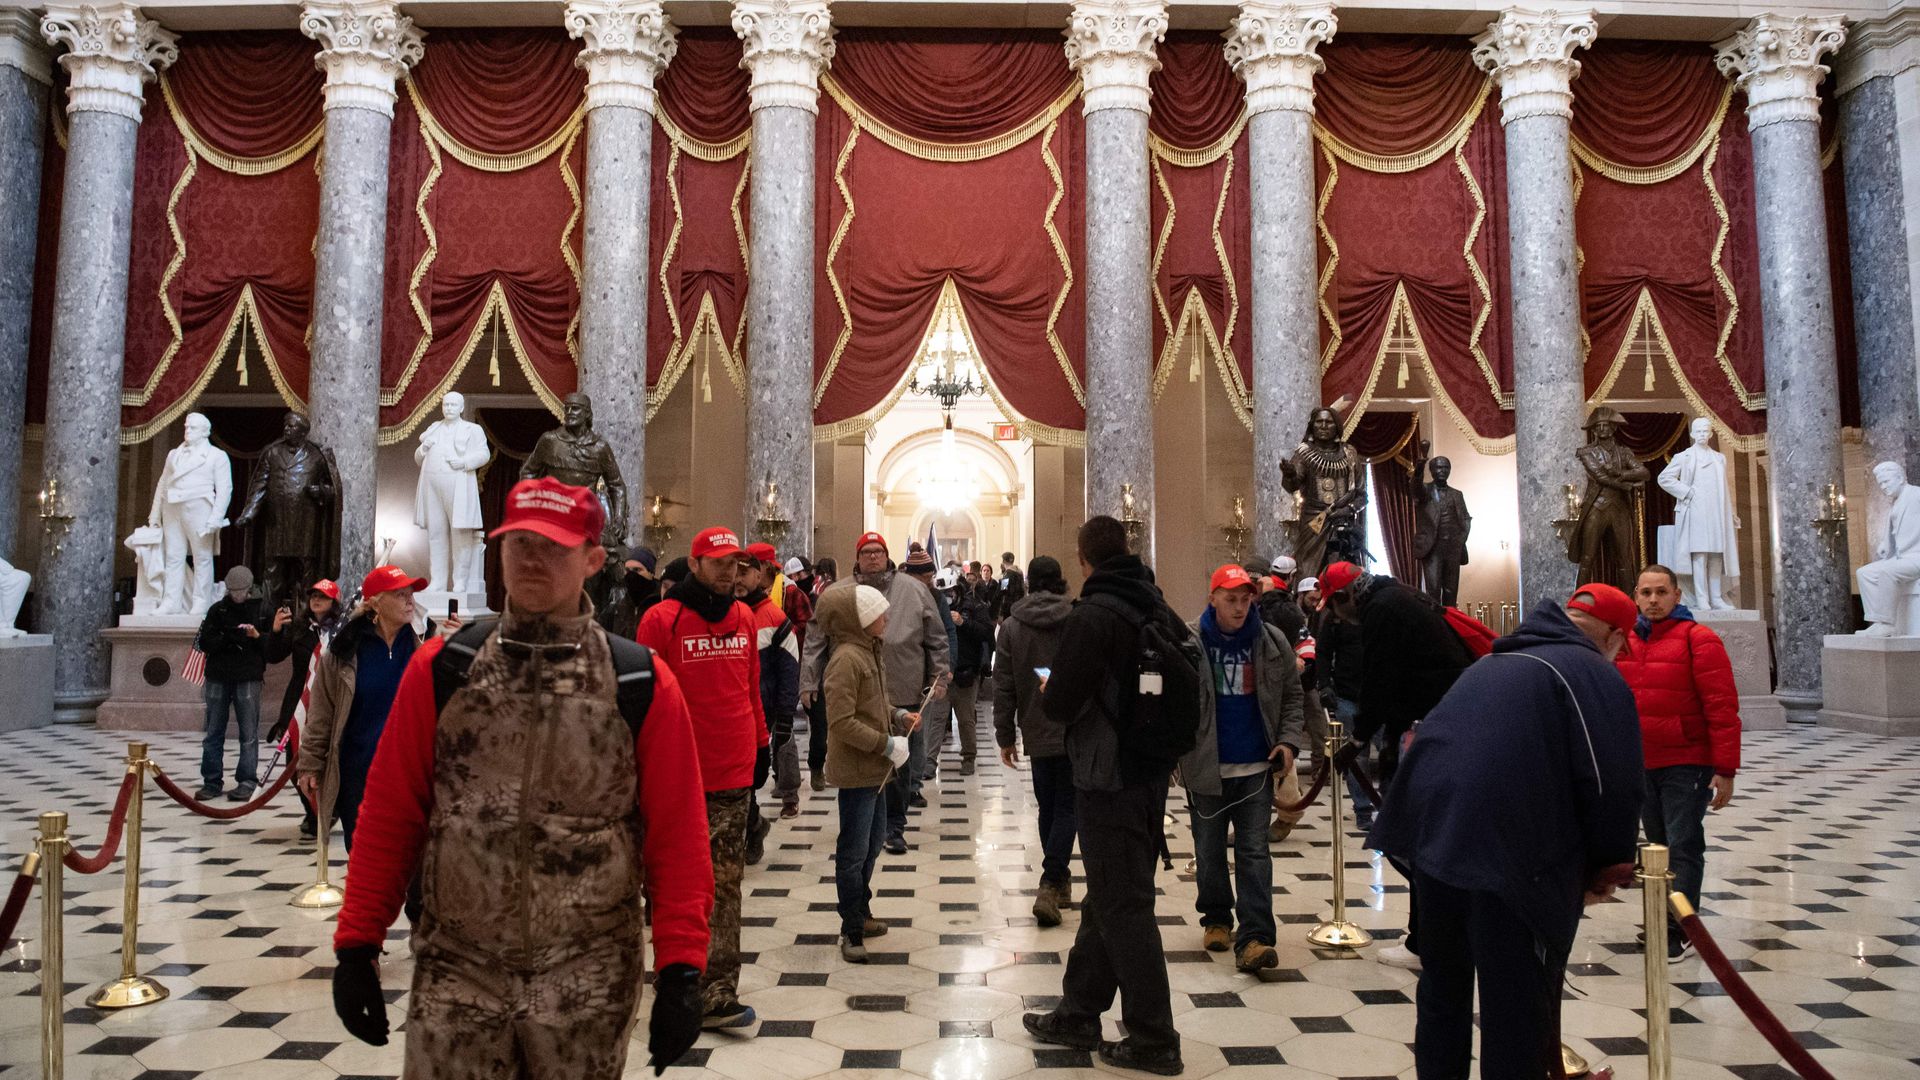 Insurrectionists are seen in Statuary Hall on Jan. 6, 2021.